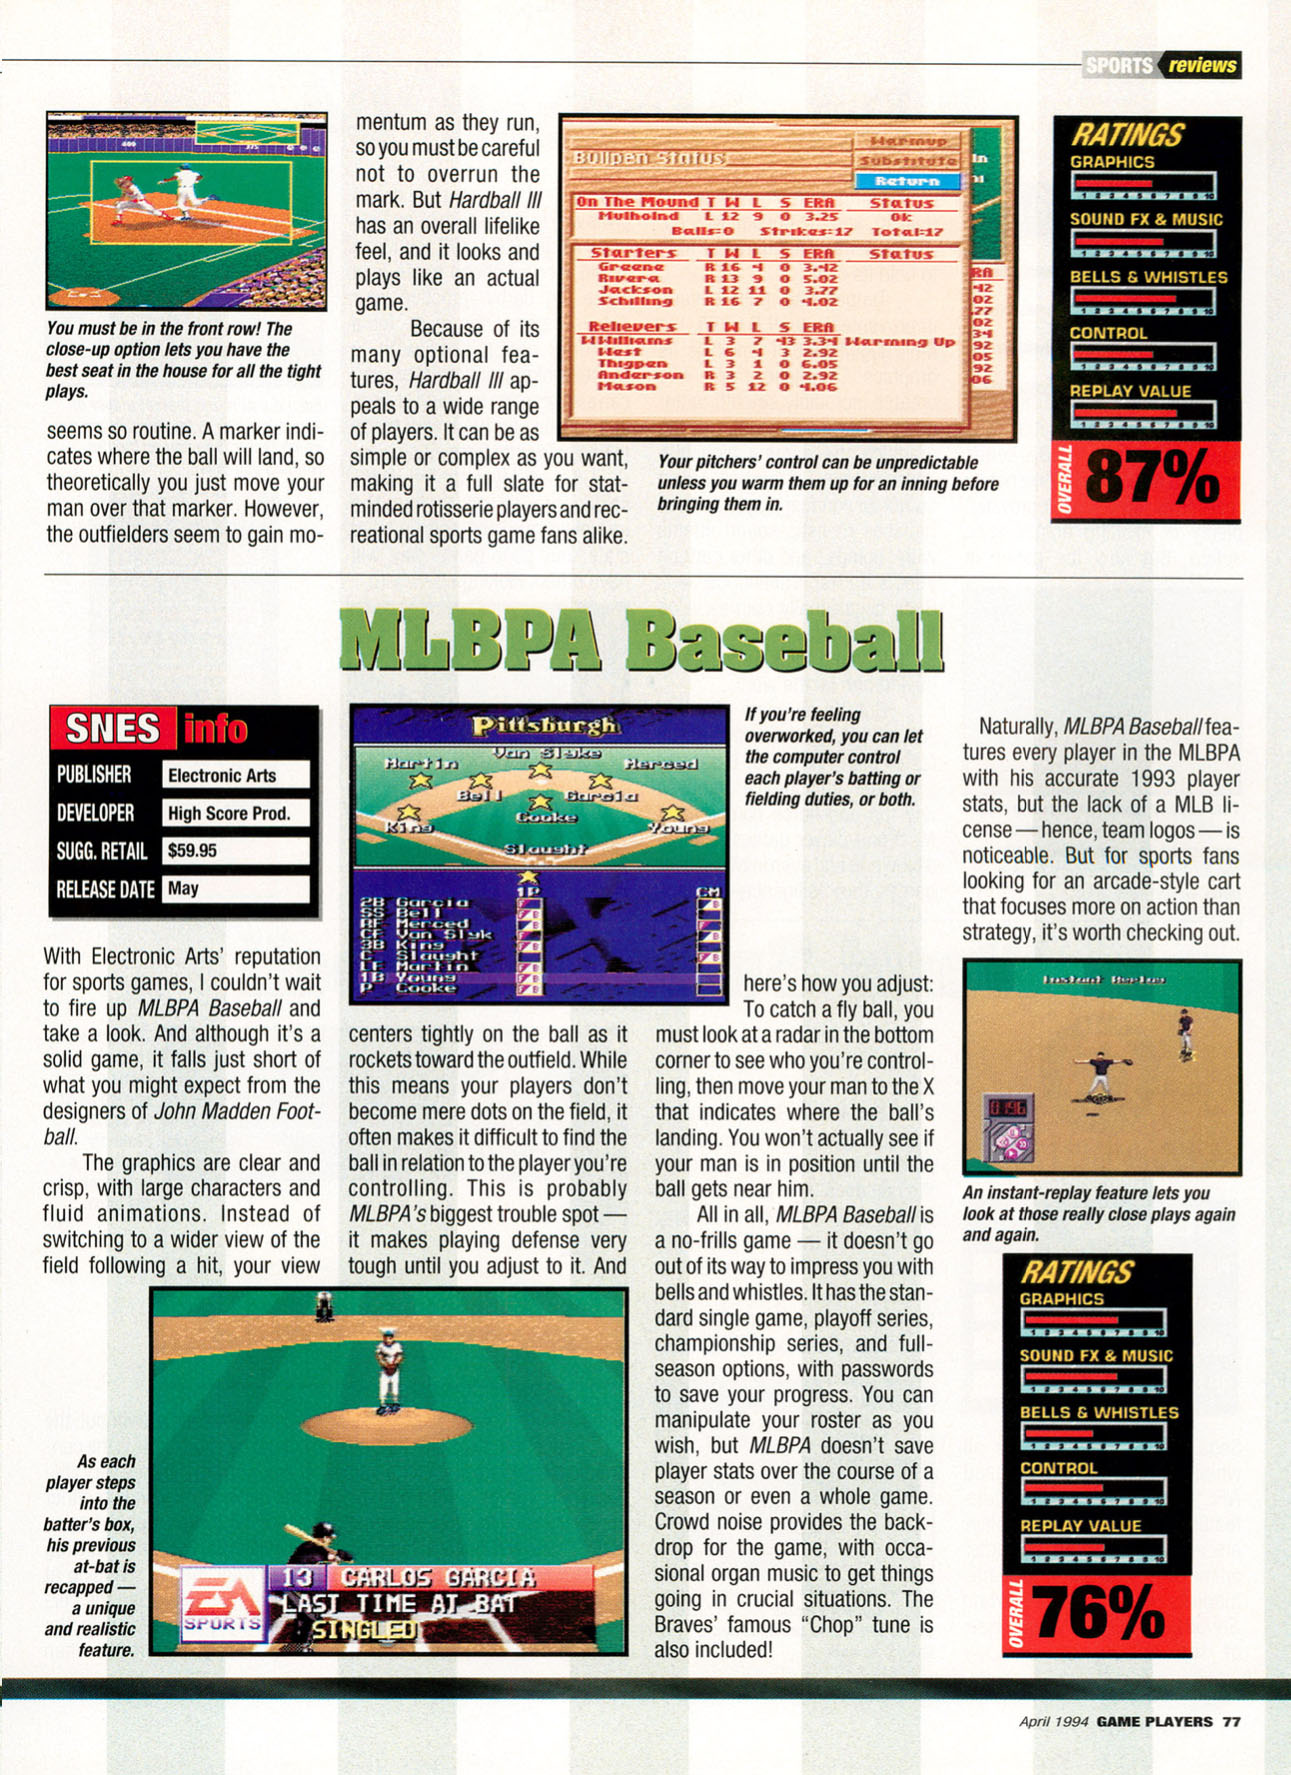 Play Ball!, Game Players April 1994 page 77